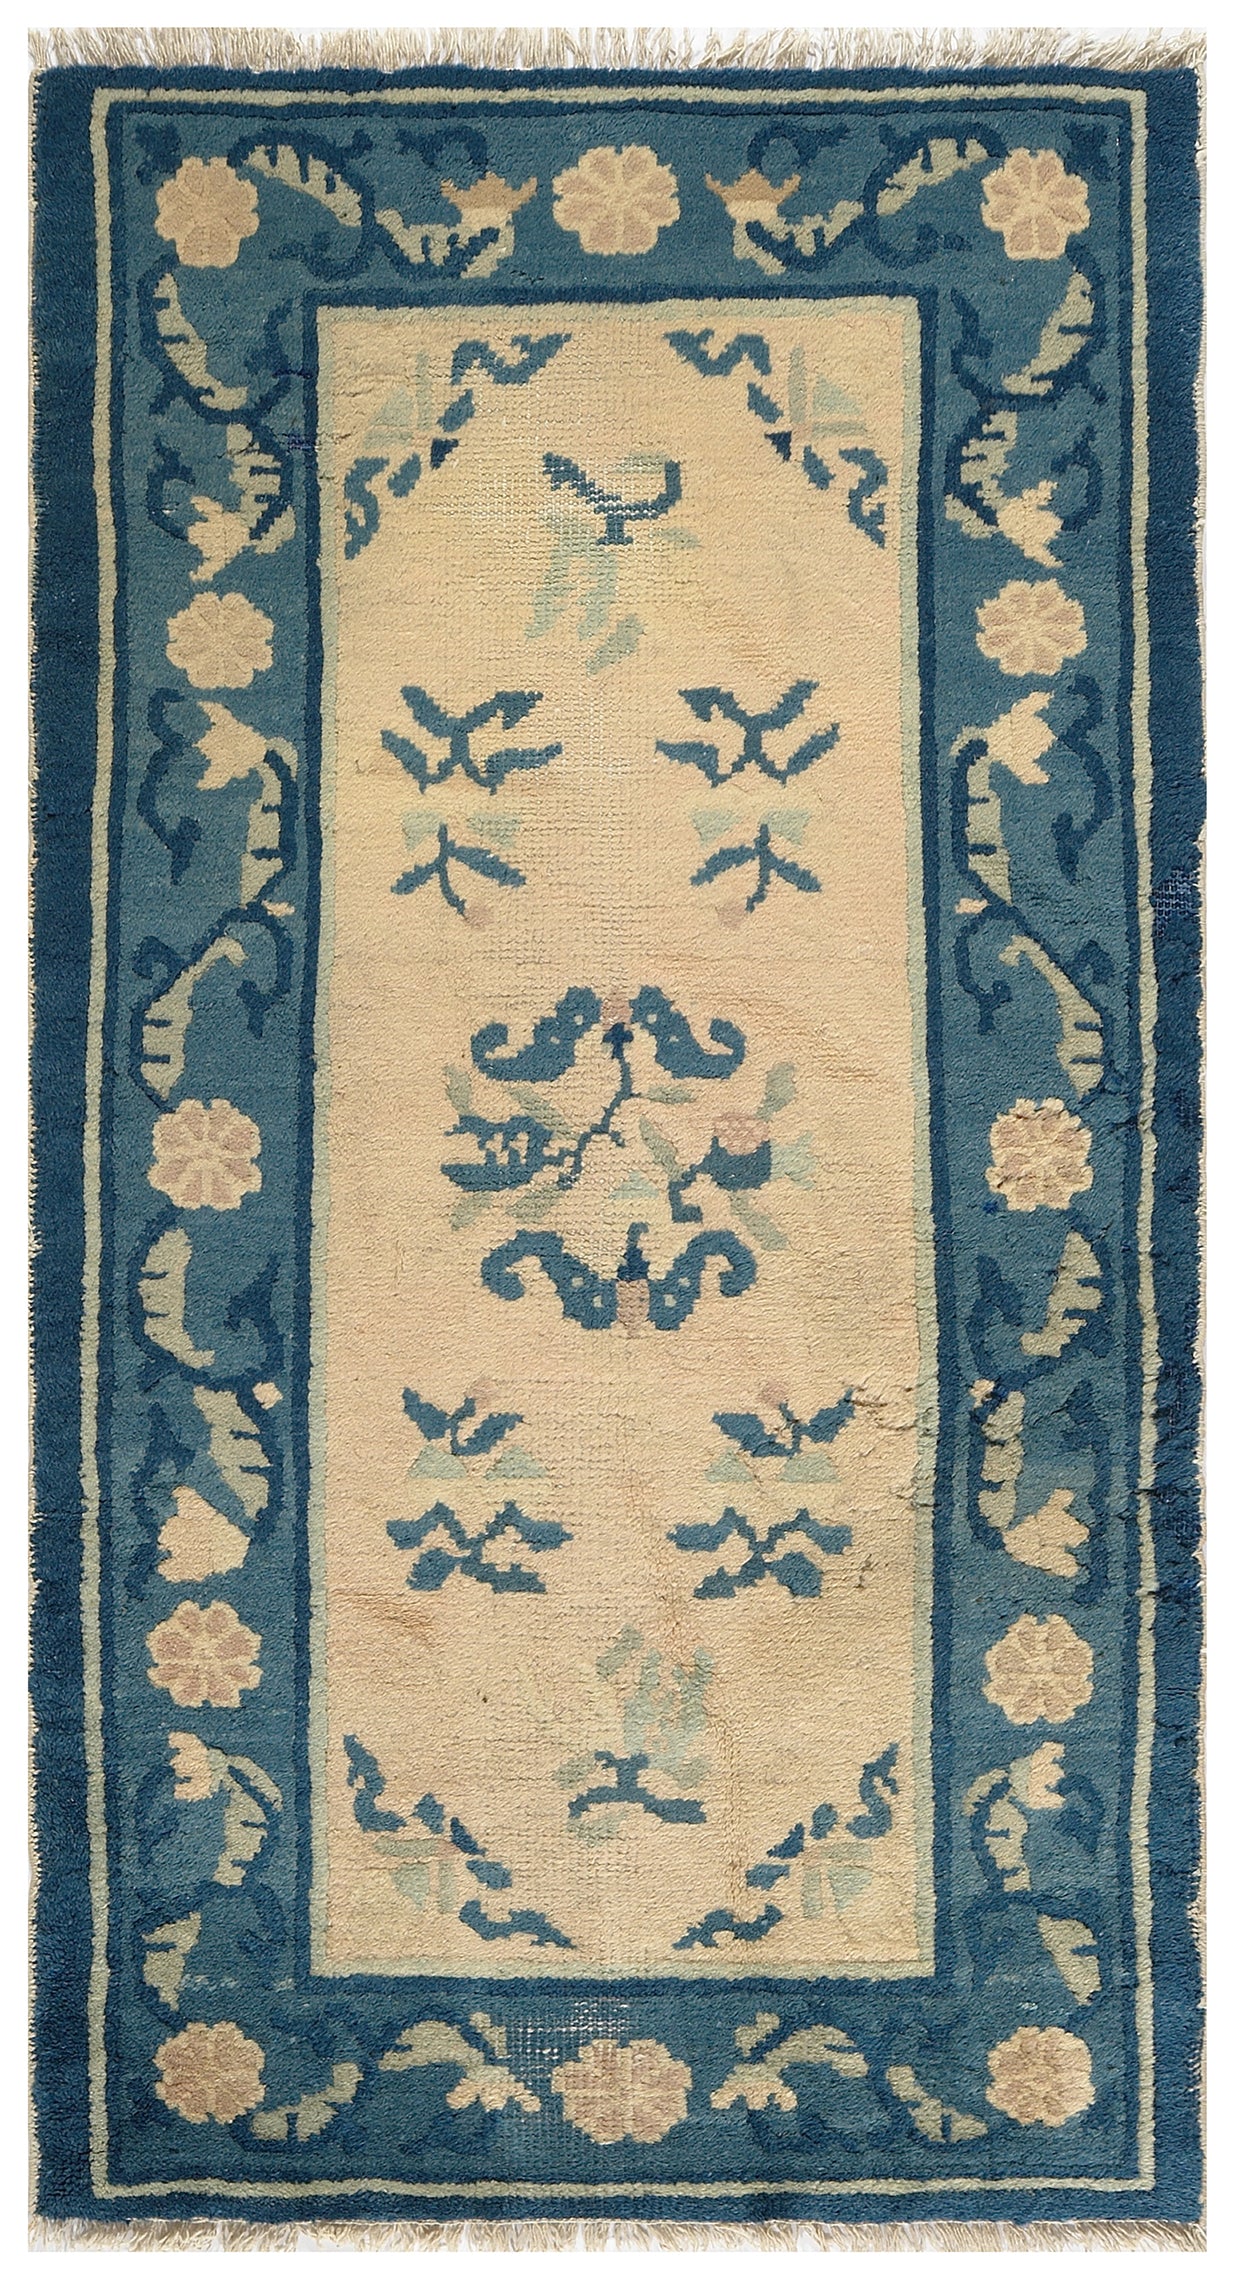 2'x4' Blue and Beige Floral Chinese Art Deco Rug